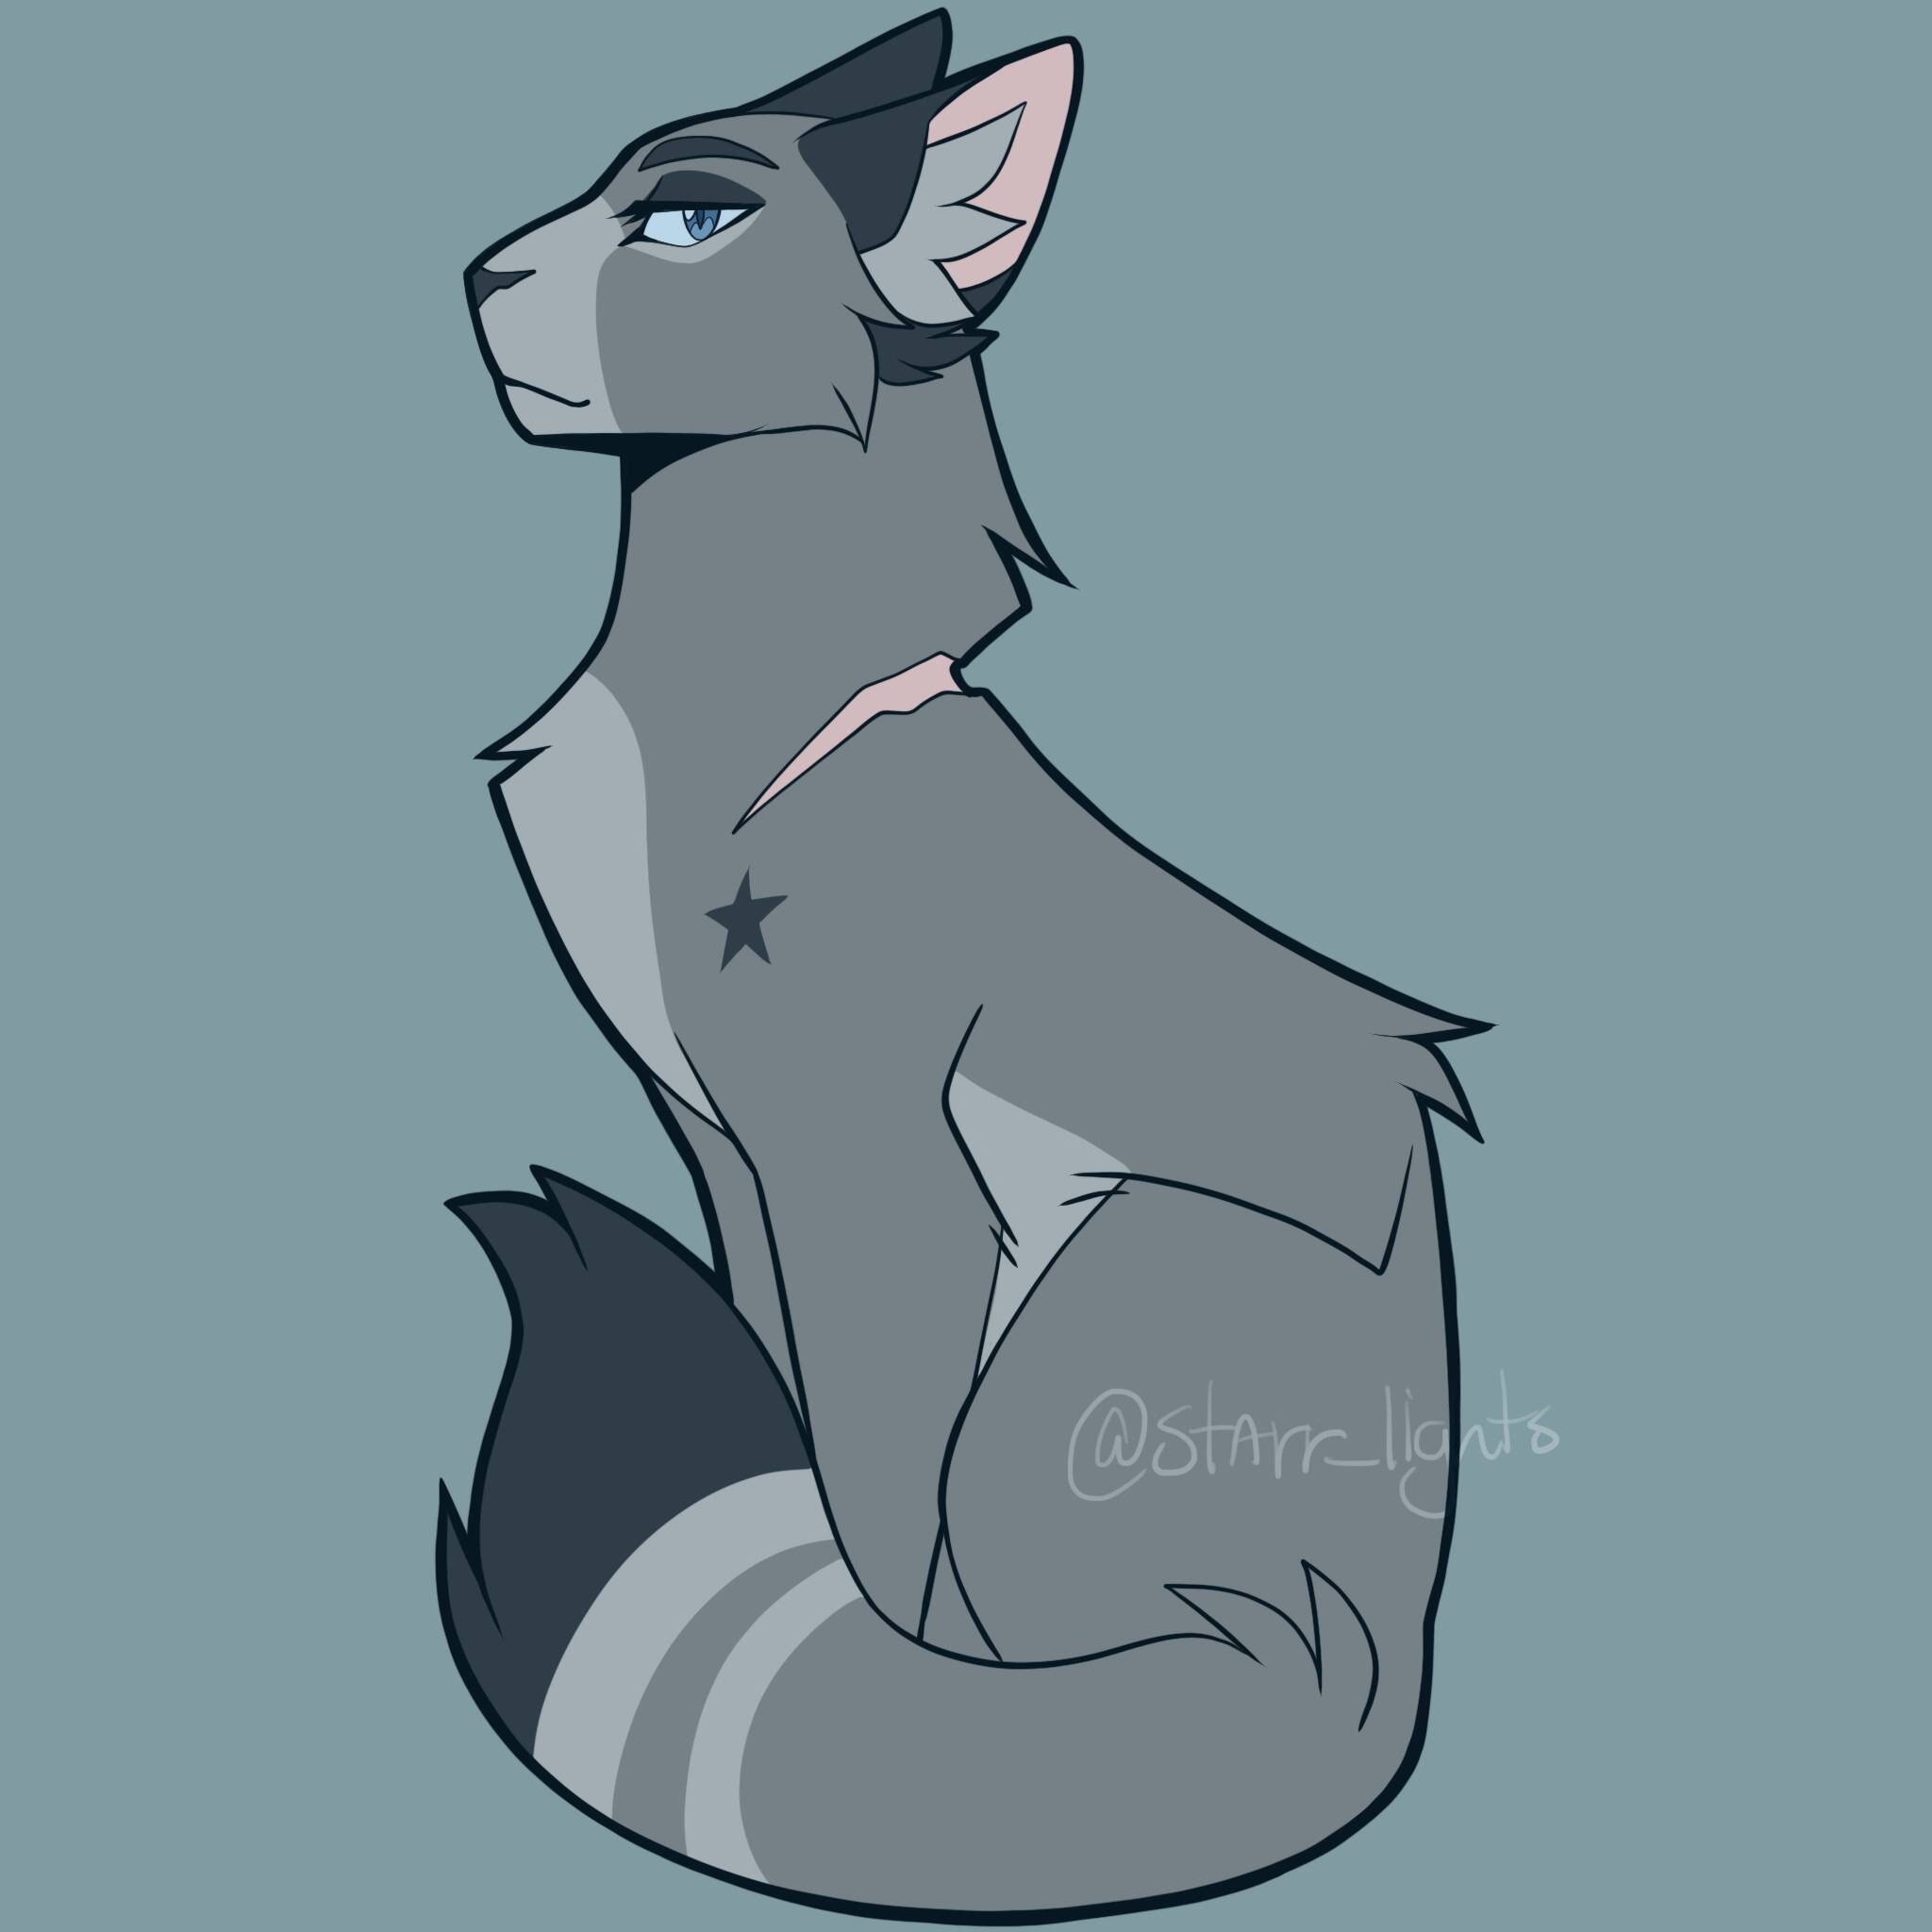 Warrior Cats - Bluestar is next and I absolutely adore the